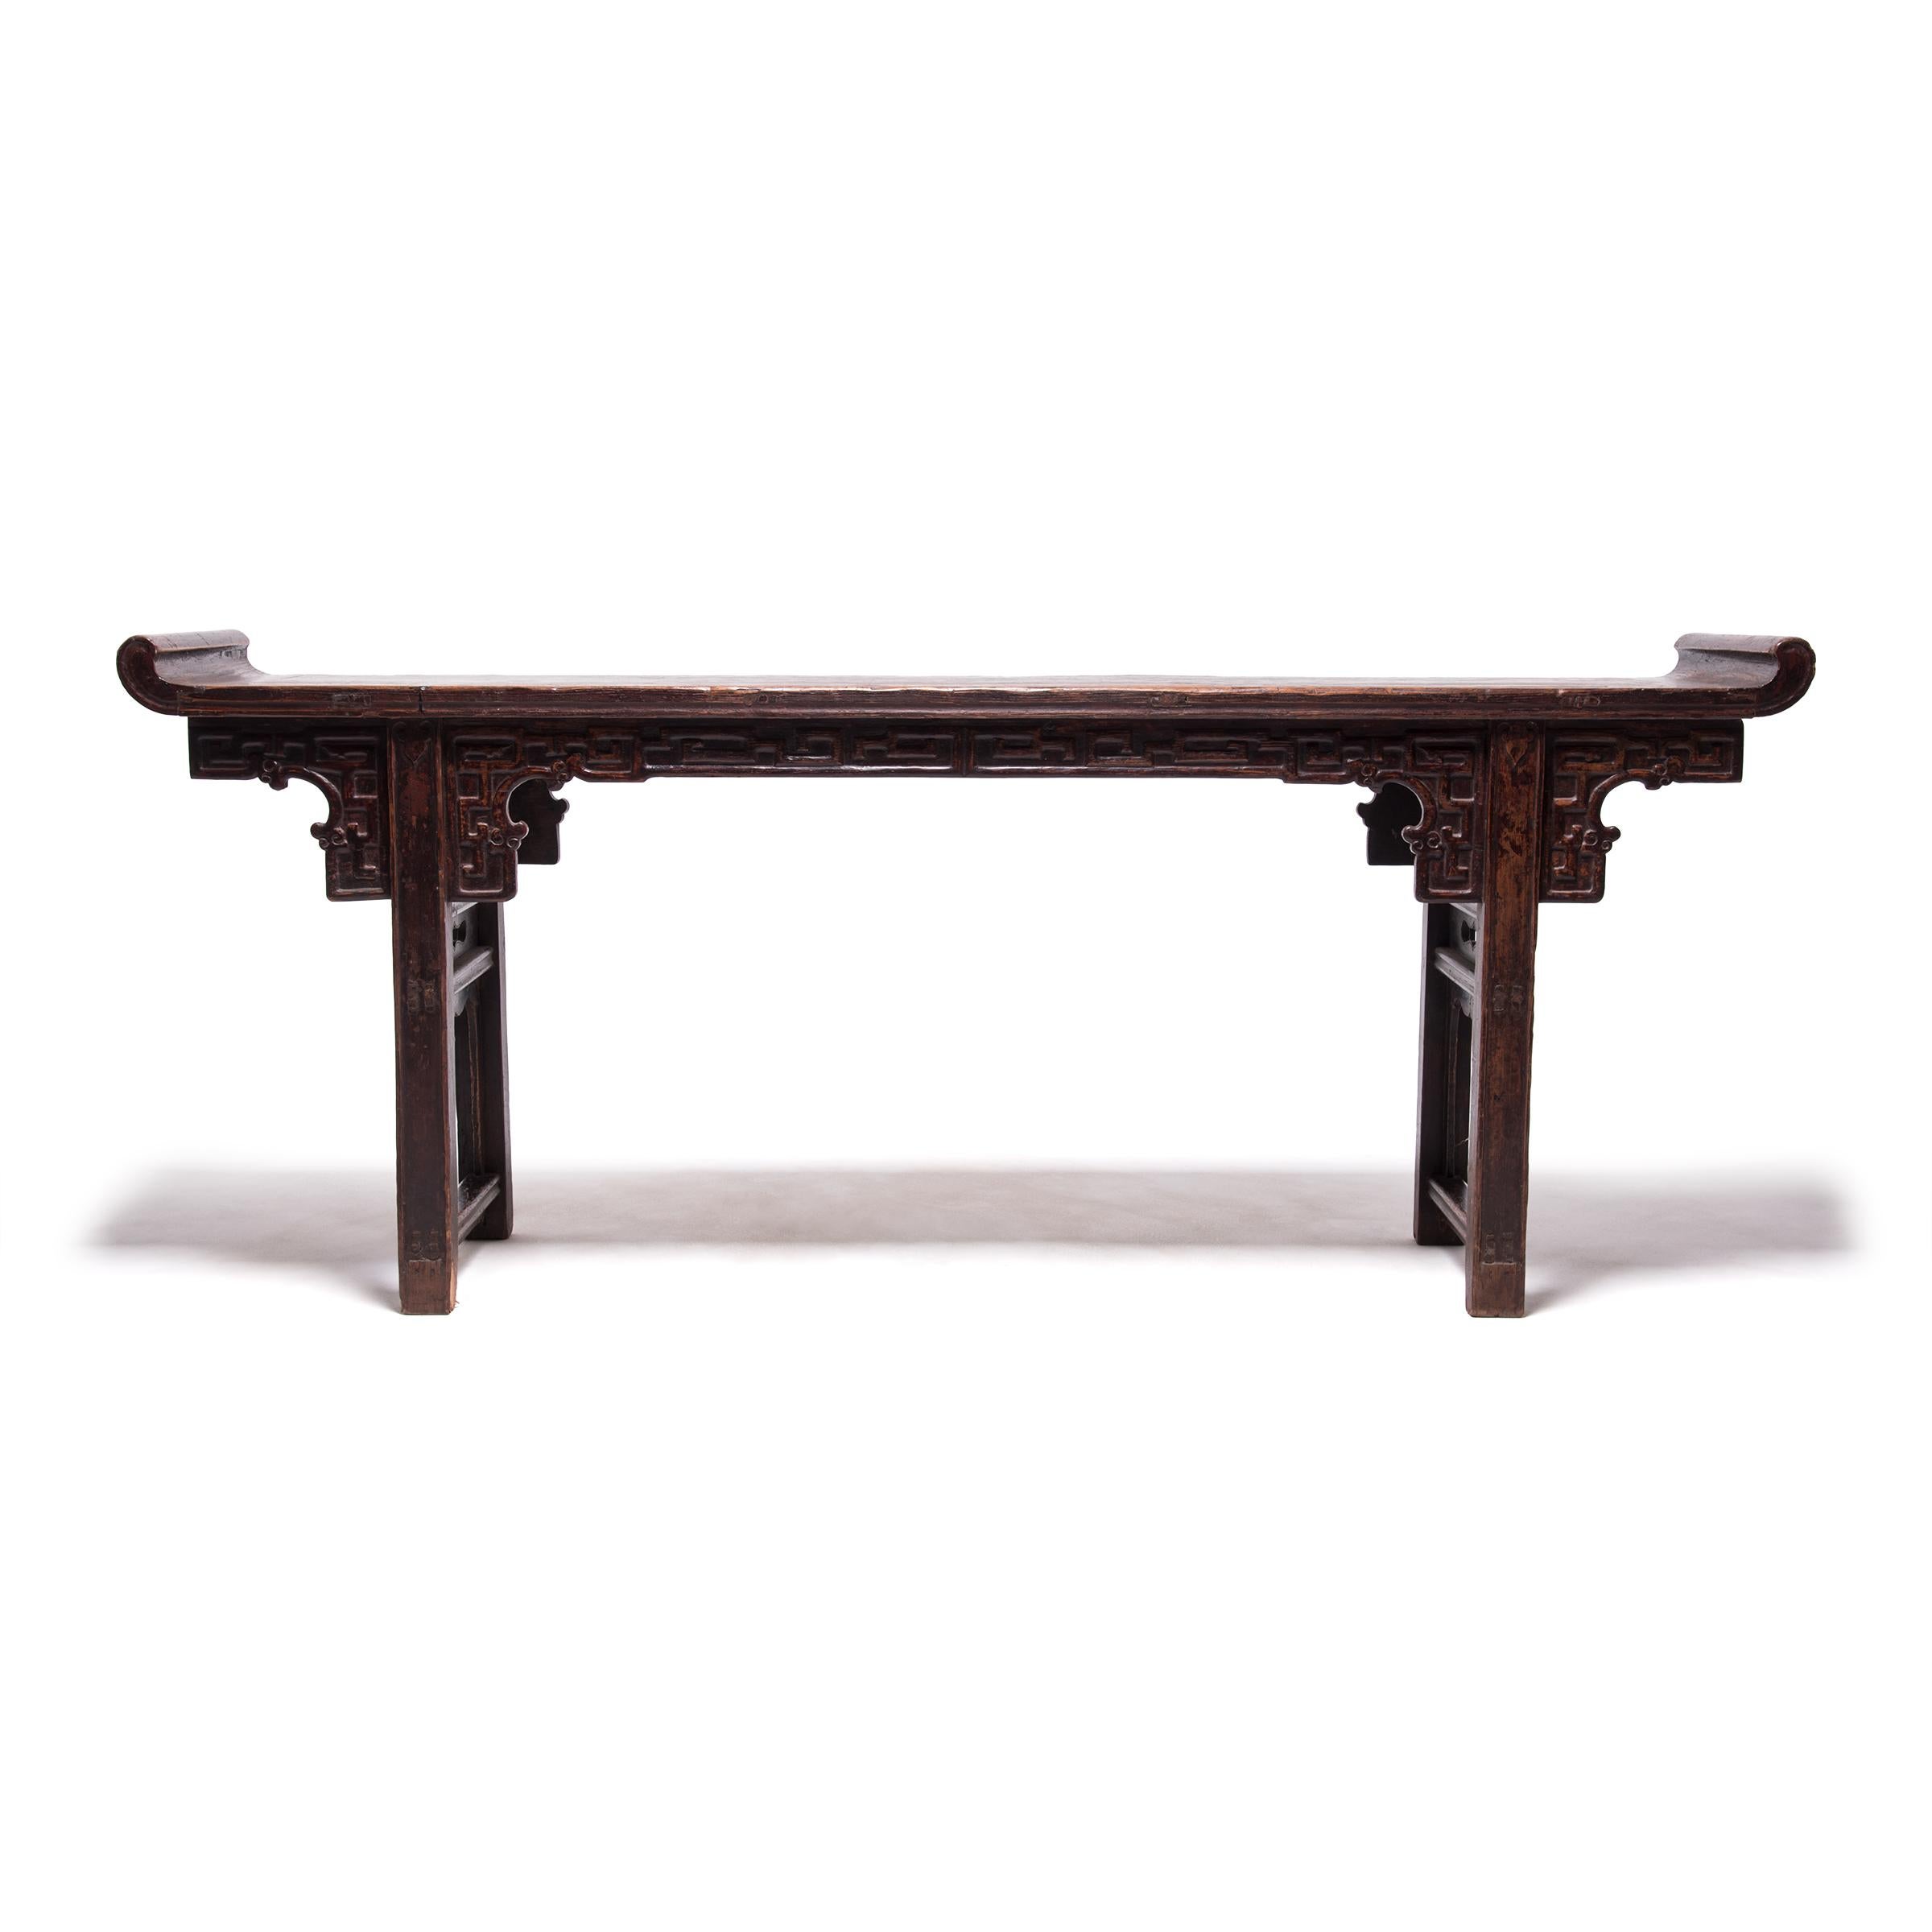 In traditional Chinese homes, slender, long tables such as this one are used to hold musical instruments, flowers, or vases. Often referred to as altar tables, this narrow table form is also used as a domestic altar for familial ancestor worship.